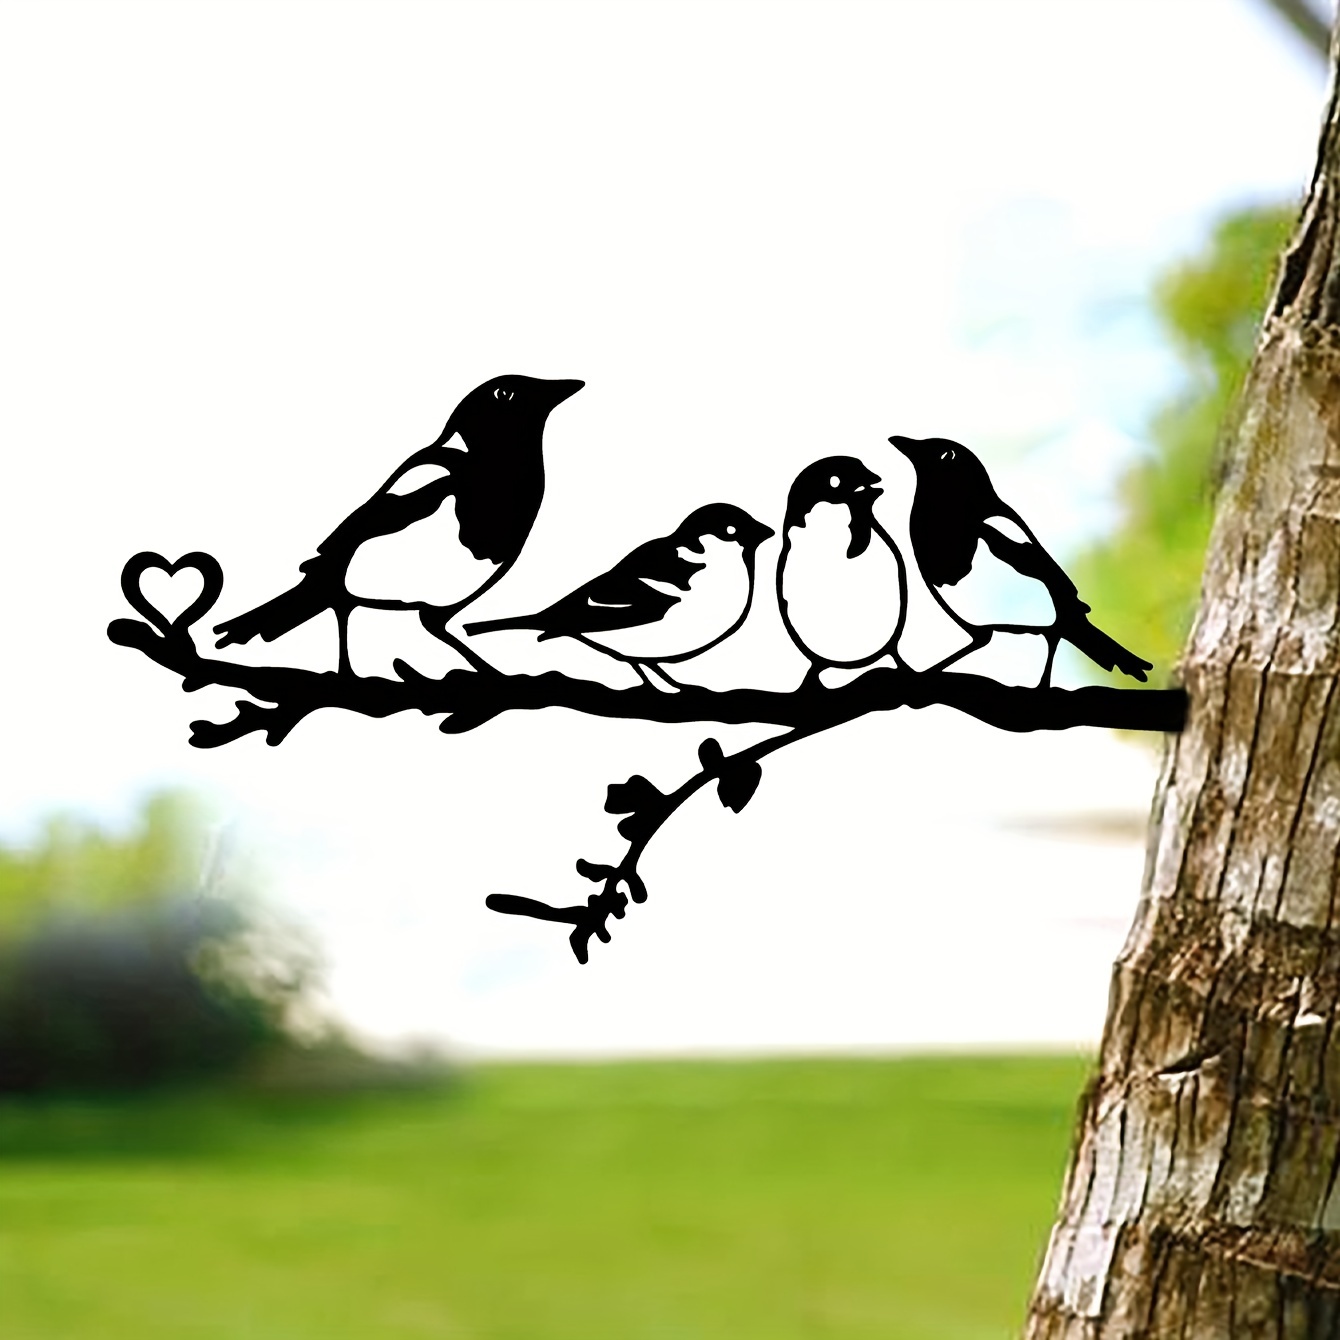 

1pc 4 Birds On Branch Steel Silhouette Metal Wall Art Home Garden Yard Patio Outdoor Statue Stake Decoration Perfect For Birthdays, Housewarming Gifts